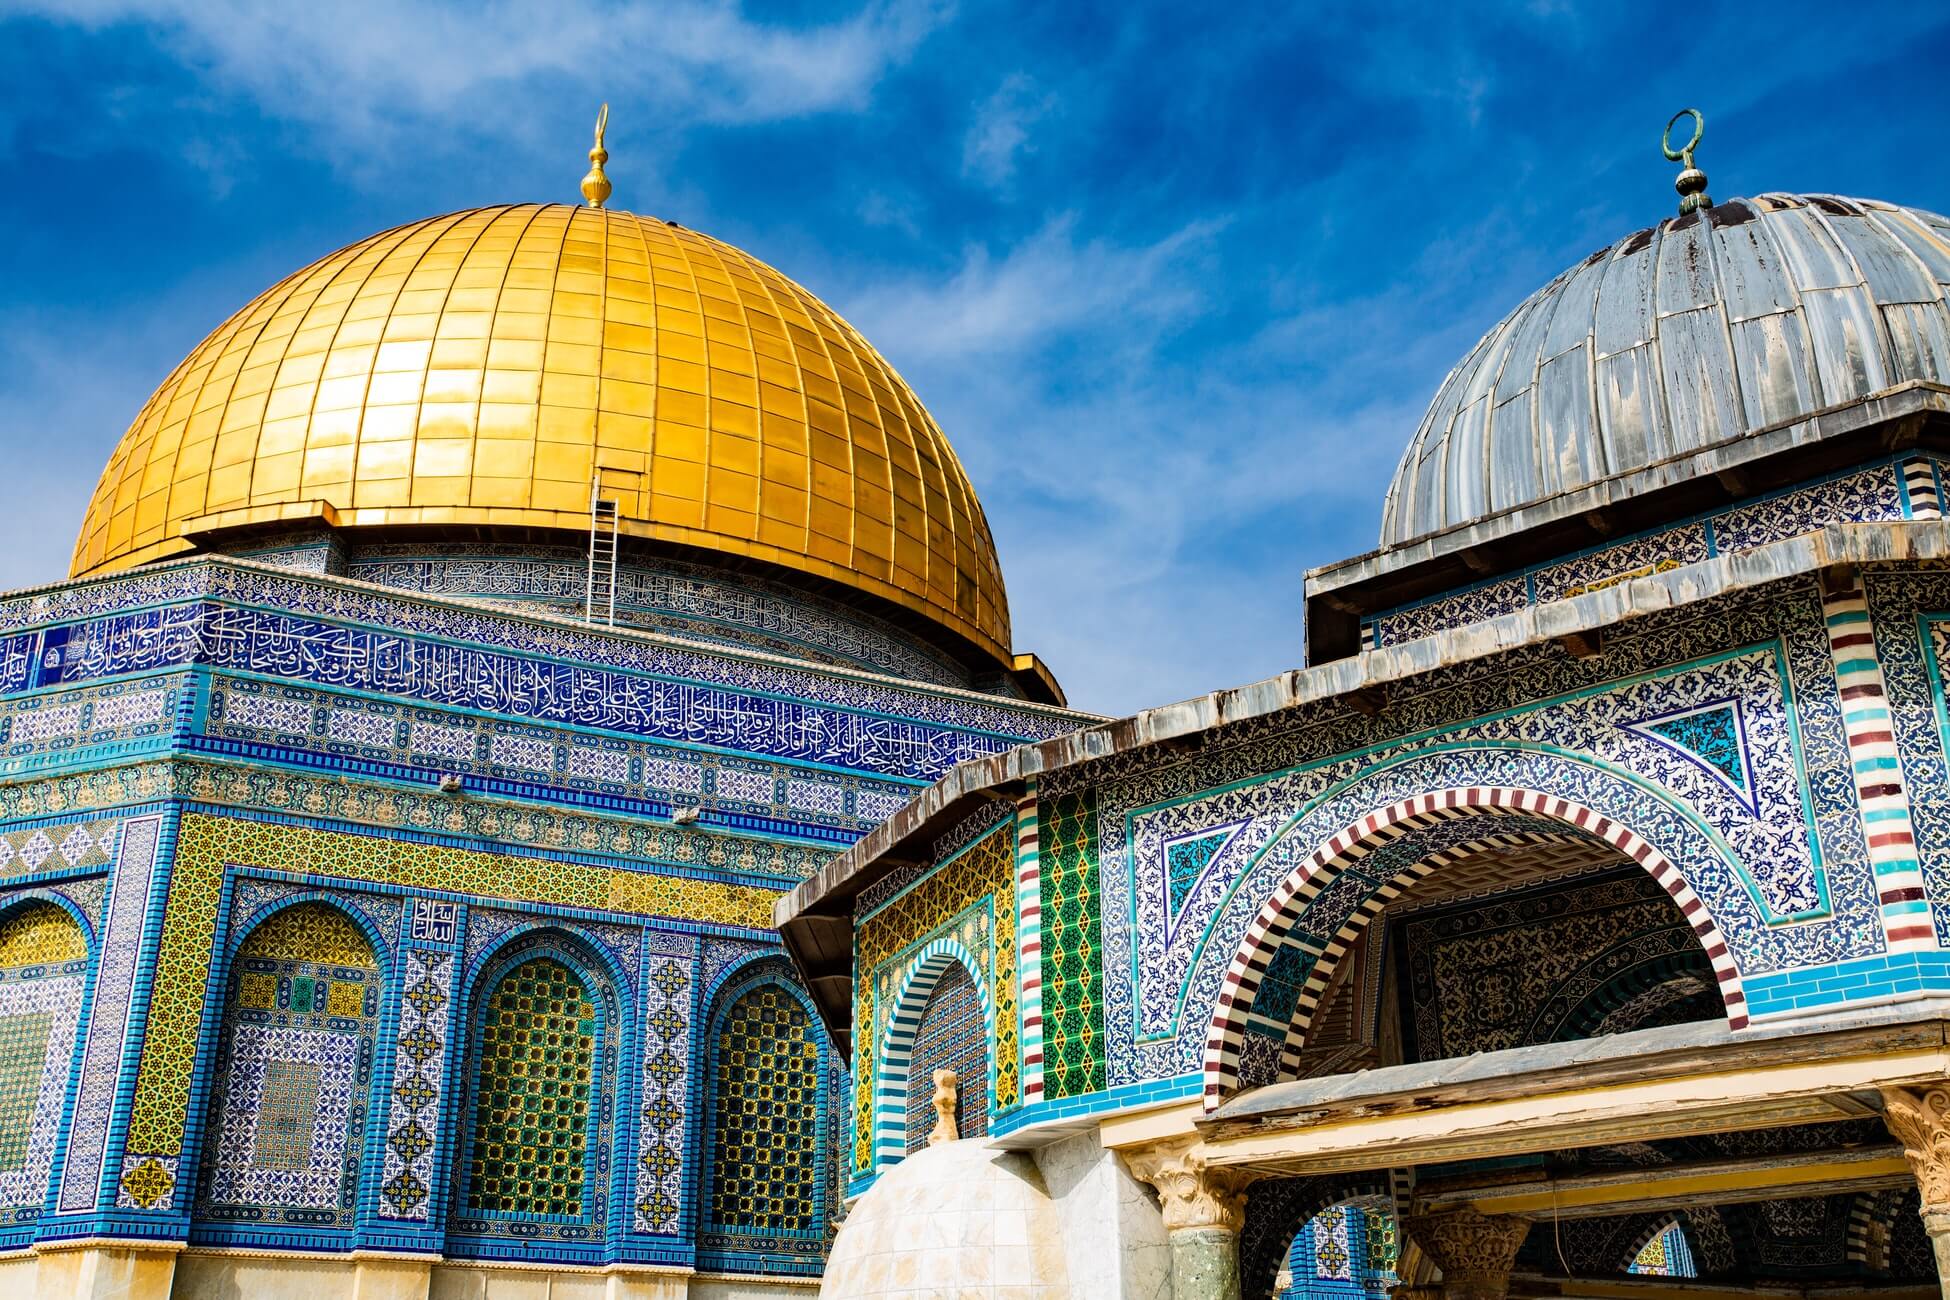 Dome of the Rock, a Muslim shrine